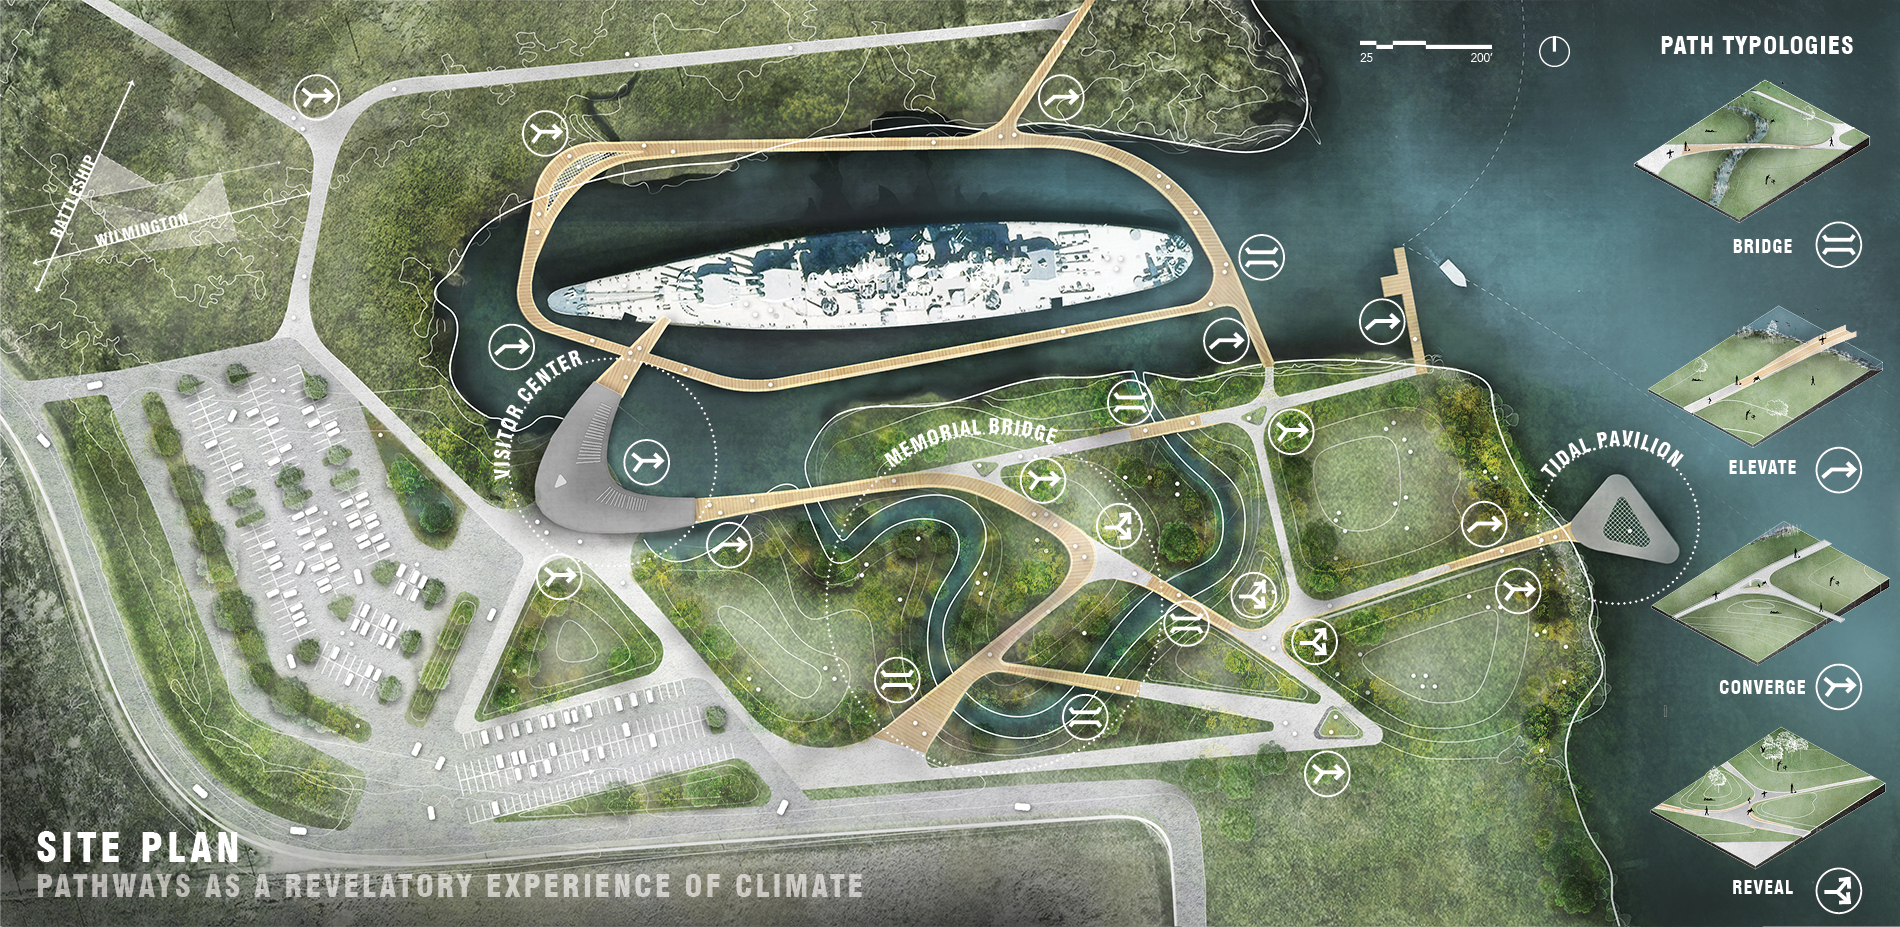 Site Plan: Pathways as a Revelatory Experience of Climate